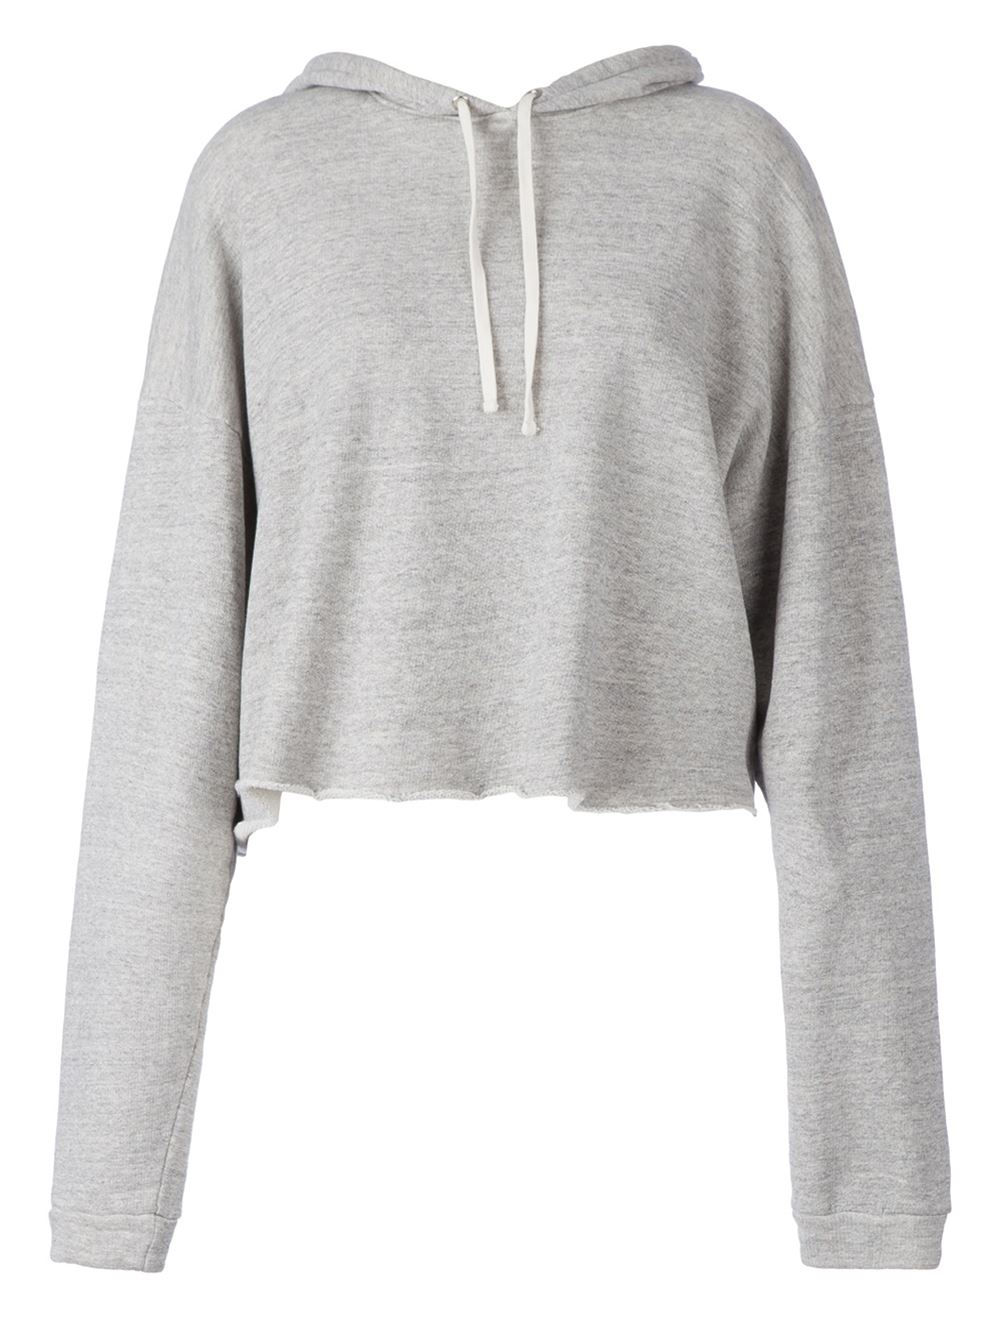 Faith connexion Cropped Hoodie in Gray (GREY) | Lyst